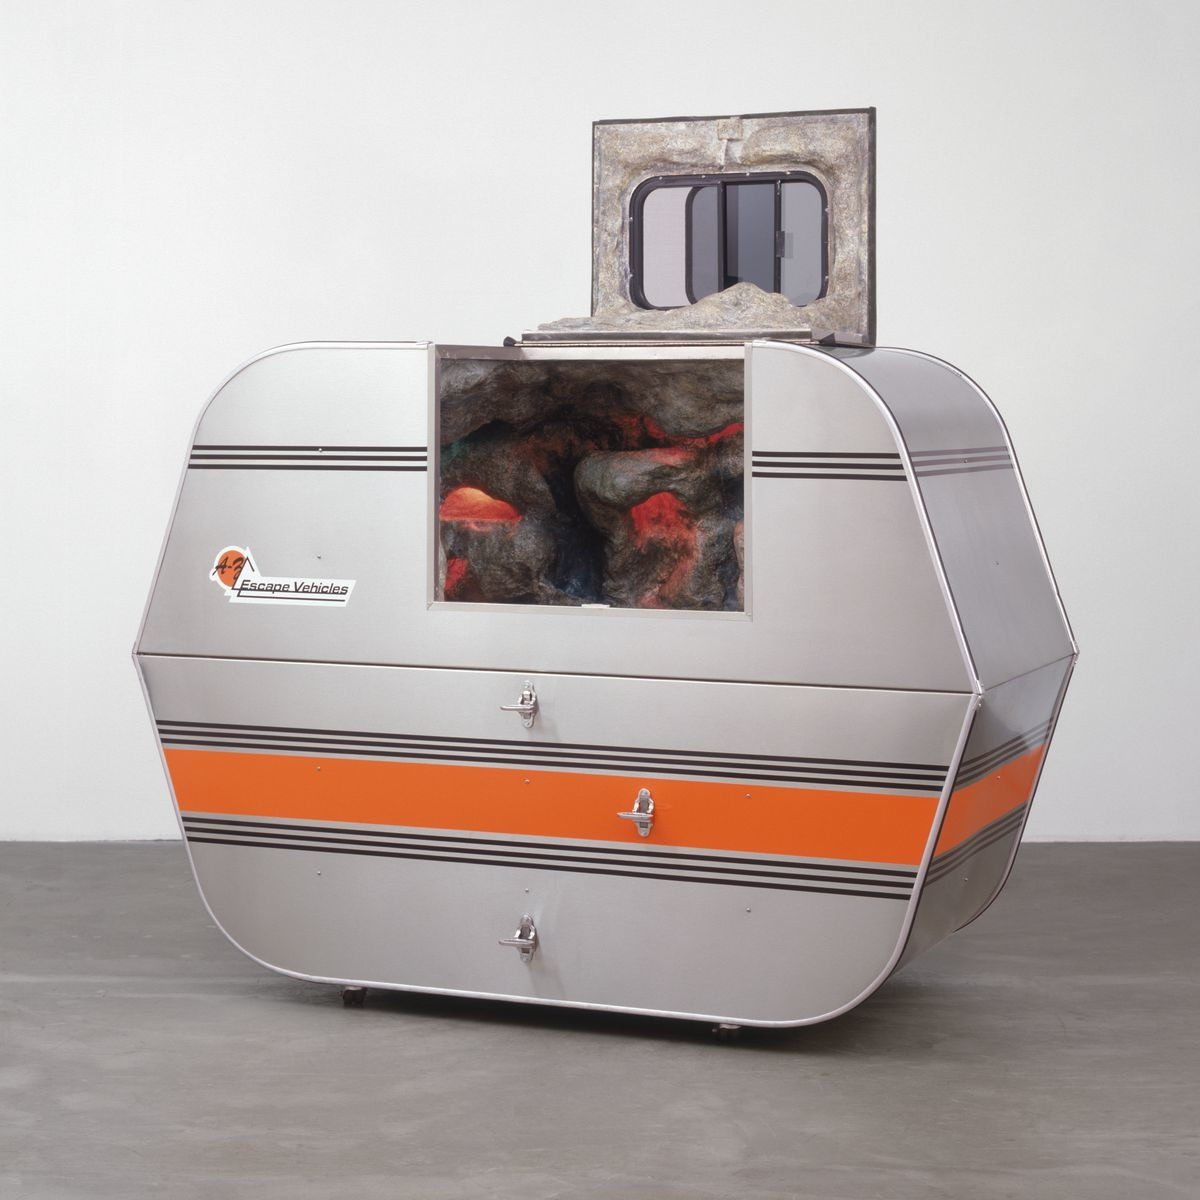 Andrea Zittel, A-Z Escape Vehicle: Customized by Andrea Zittel, 1996. Exterior: steel, insulation, wood and glass. Interior: colored lights, water, fiberglass, wood, papier-mâché, pebbles and paint, 62" x 7' x 40" (157.5 x 213.3 x 101.6 cm). The Norman and Rosita Winston Foundation, Inc. Fund and an anonymous fund. © 2012 Andrea Zittel. 